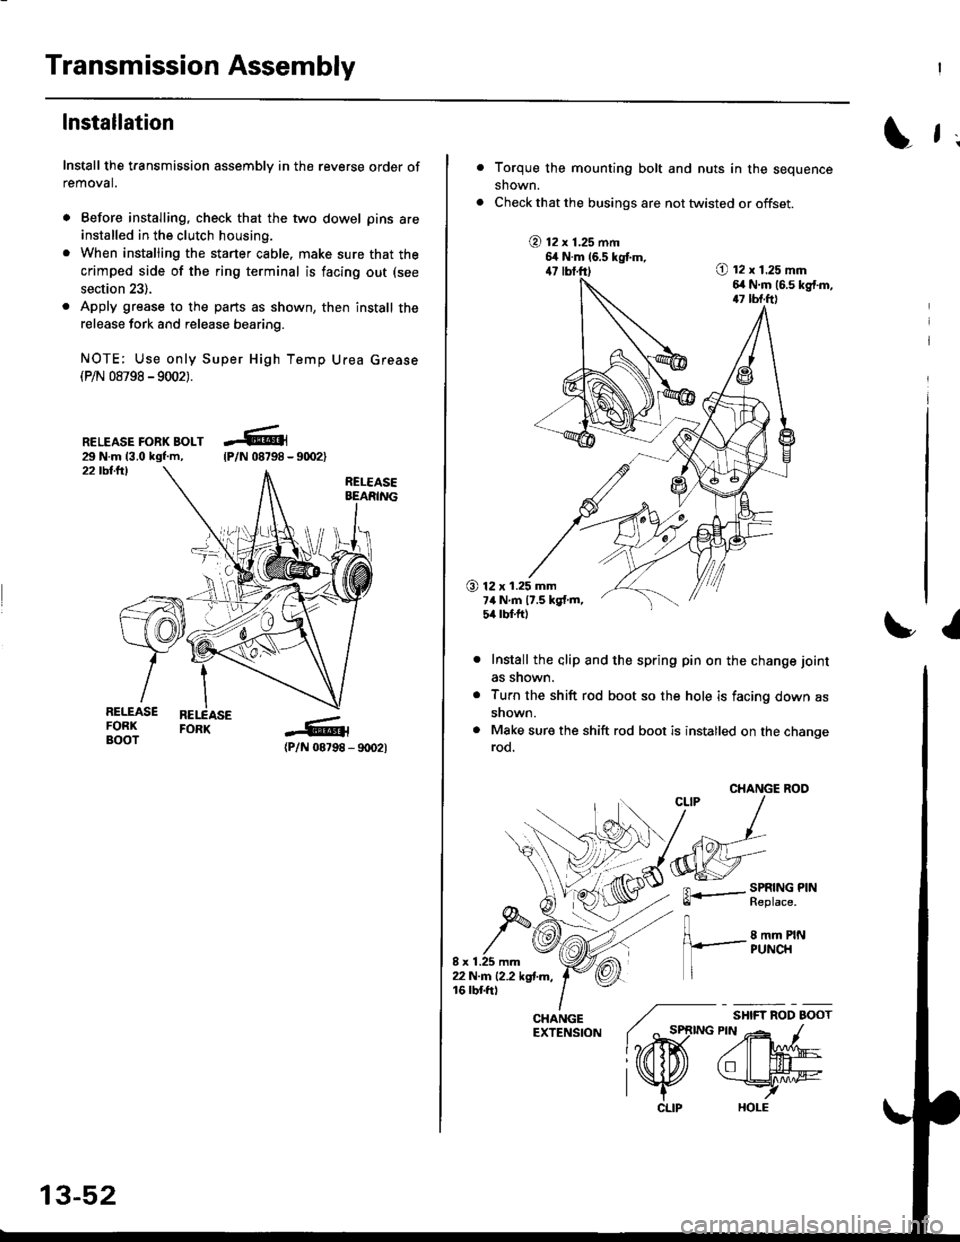 HONDA CIVIC 1996 6.G Workshop Manual Transmission Assembly
lnstallation
Install the transmission assembly in the reverse order of
removal.
. Before installing, check that the two dowel pins are
installed in the clutch housing.
. When ins